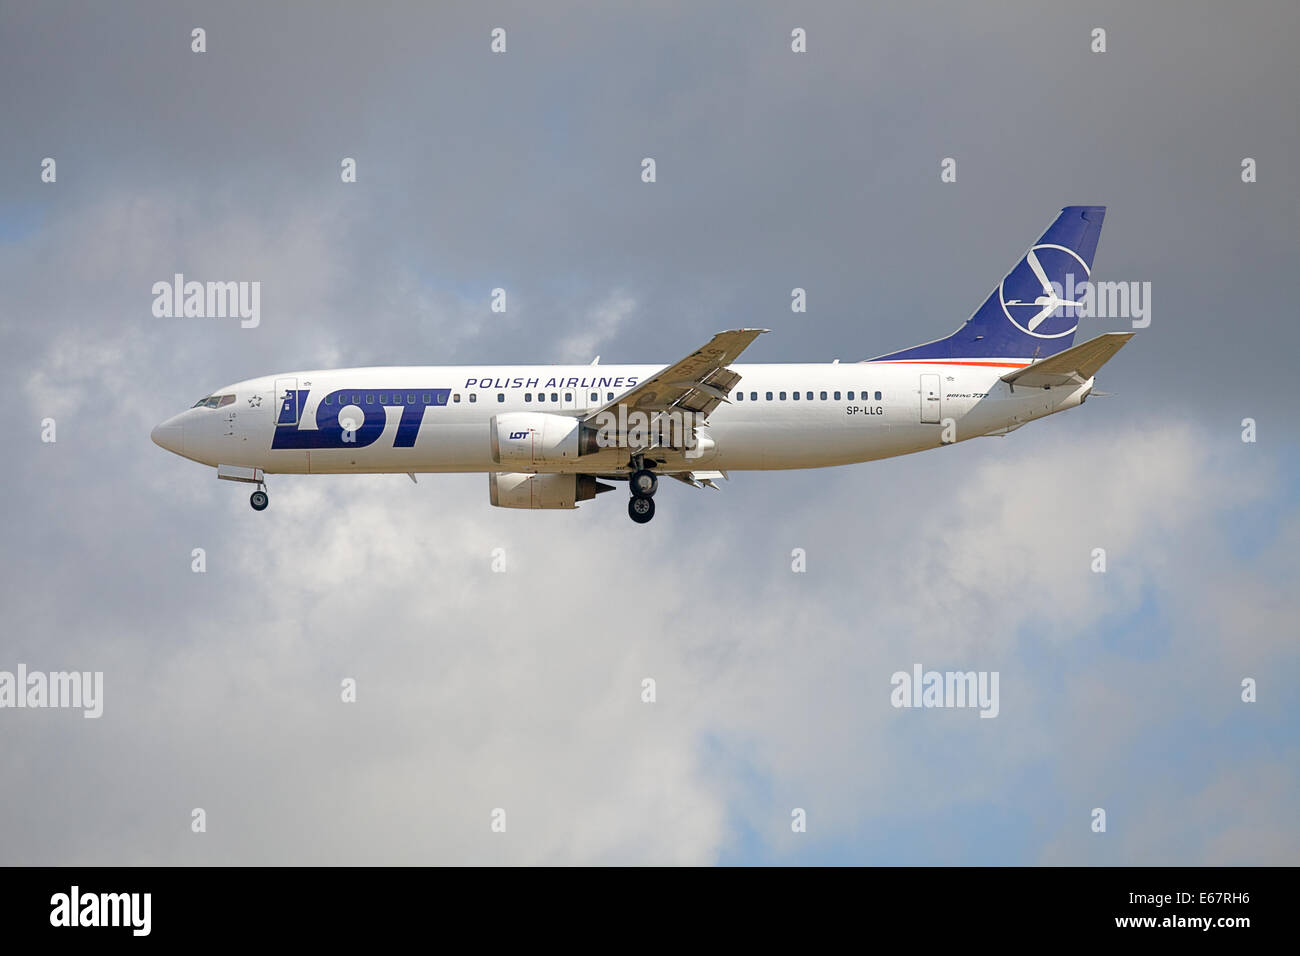 LOT Polish Airlines Boeing 737 SP-LLG arriving at London-Heathrow Airport LHR Stock Photo